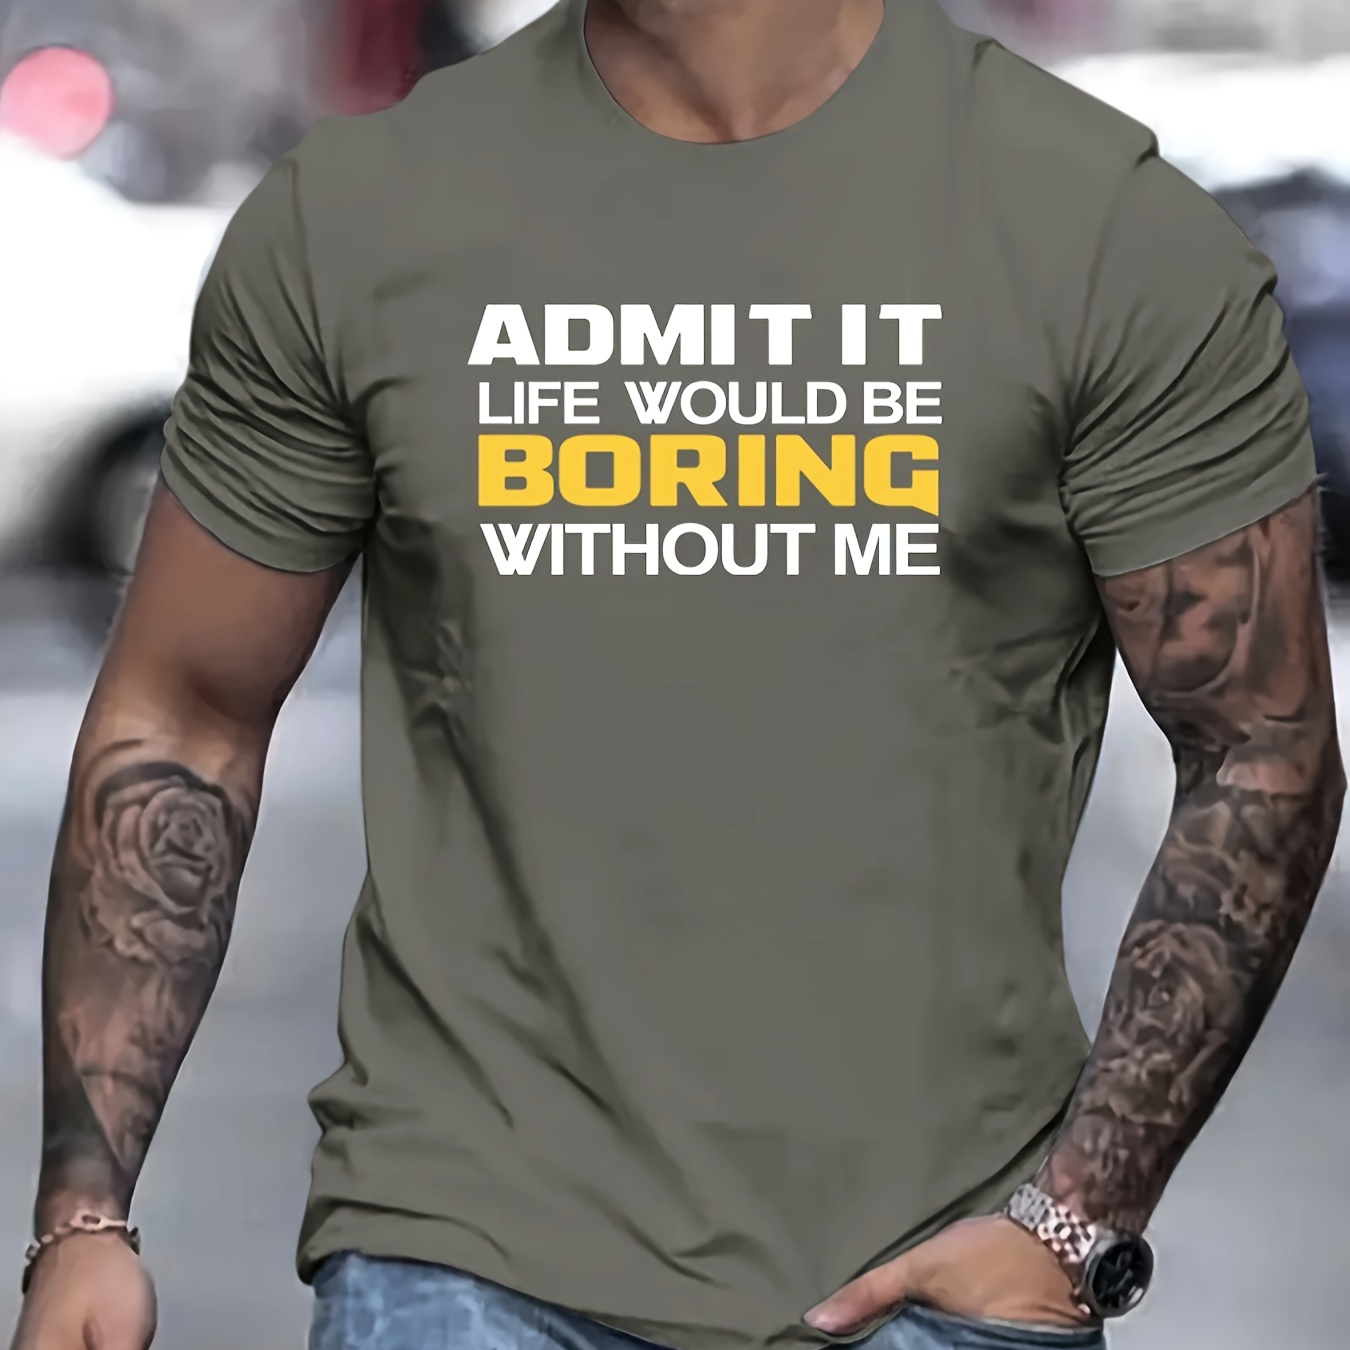 

Life Would Be Boring Without Me Print T Shirt, Tees For Men, Casual Short Sleeve T-shirt For Summer